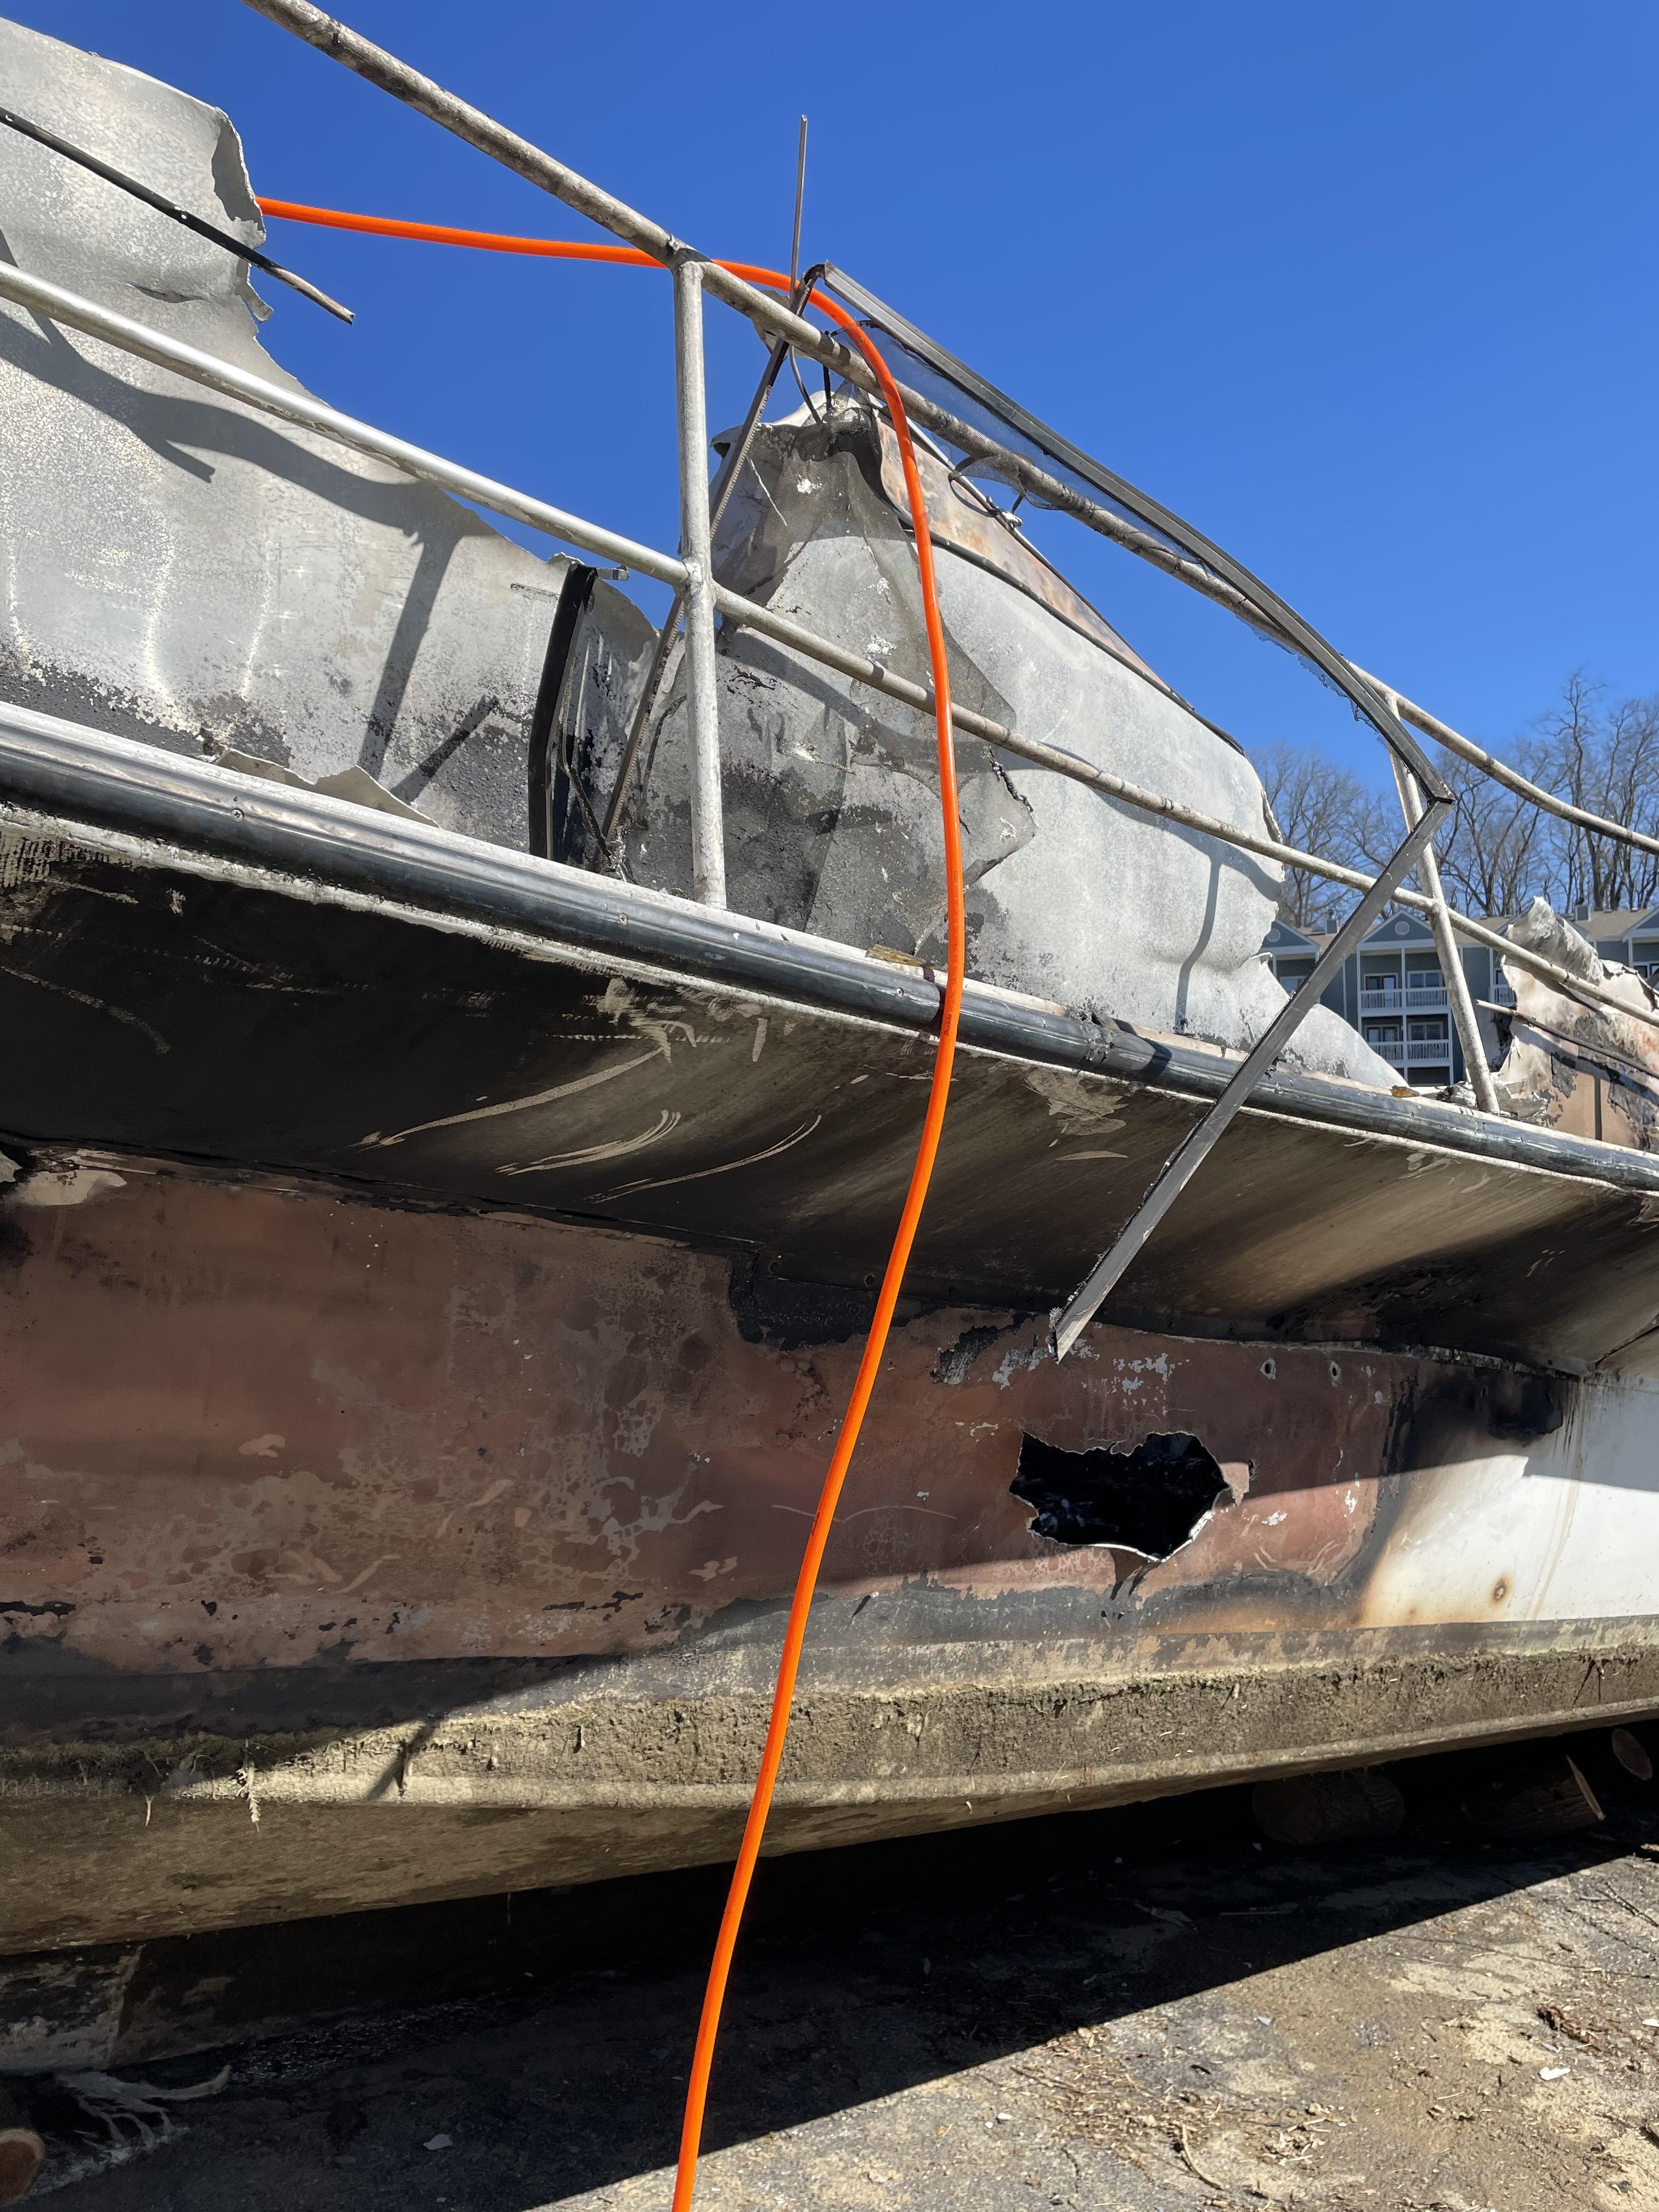 Melted aluminum hull from fire on houseboat.